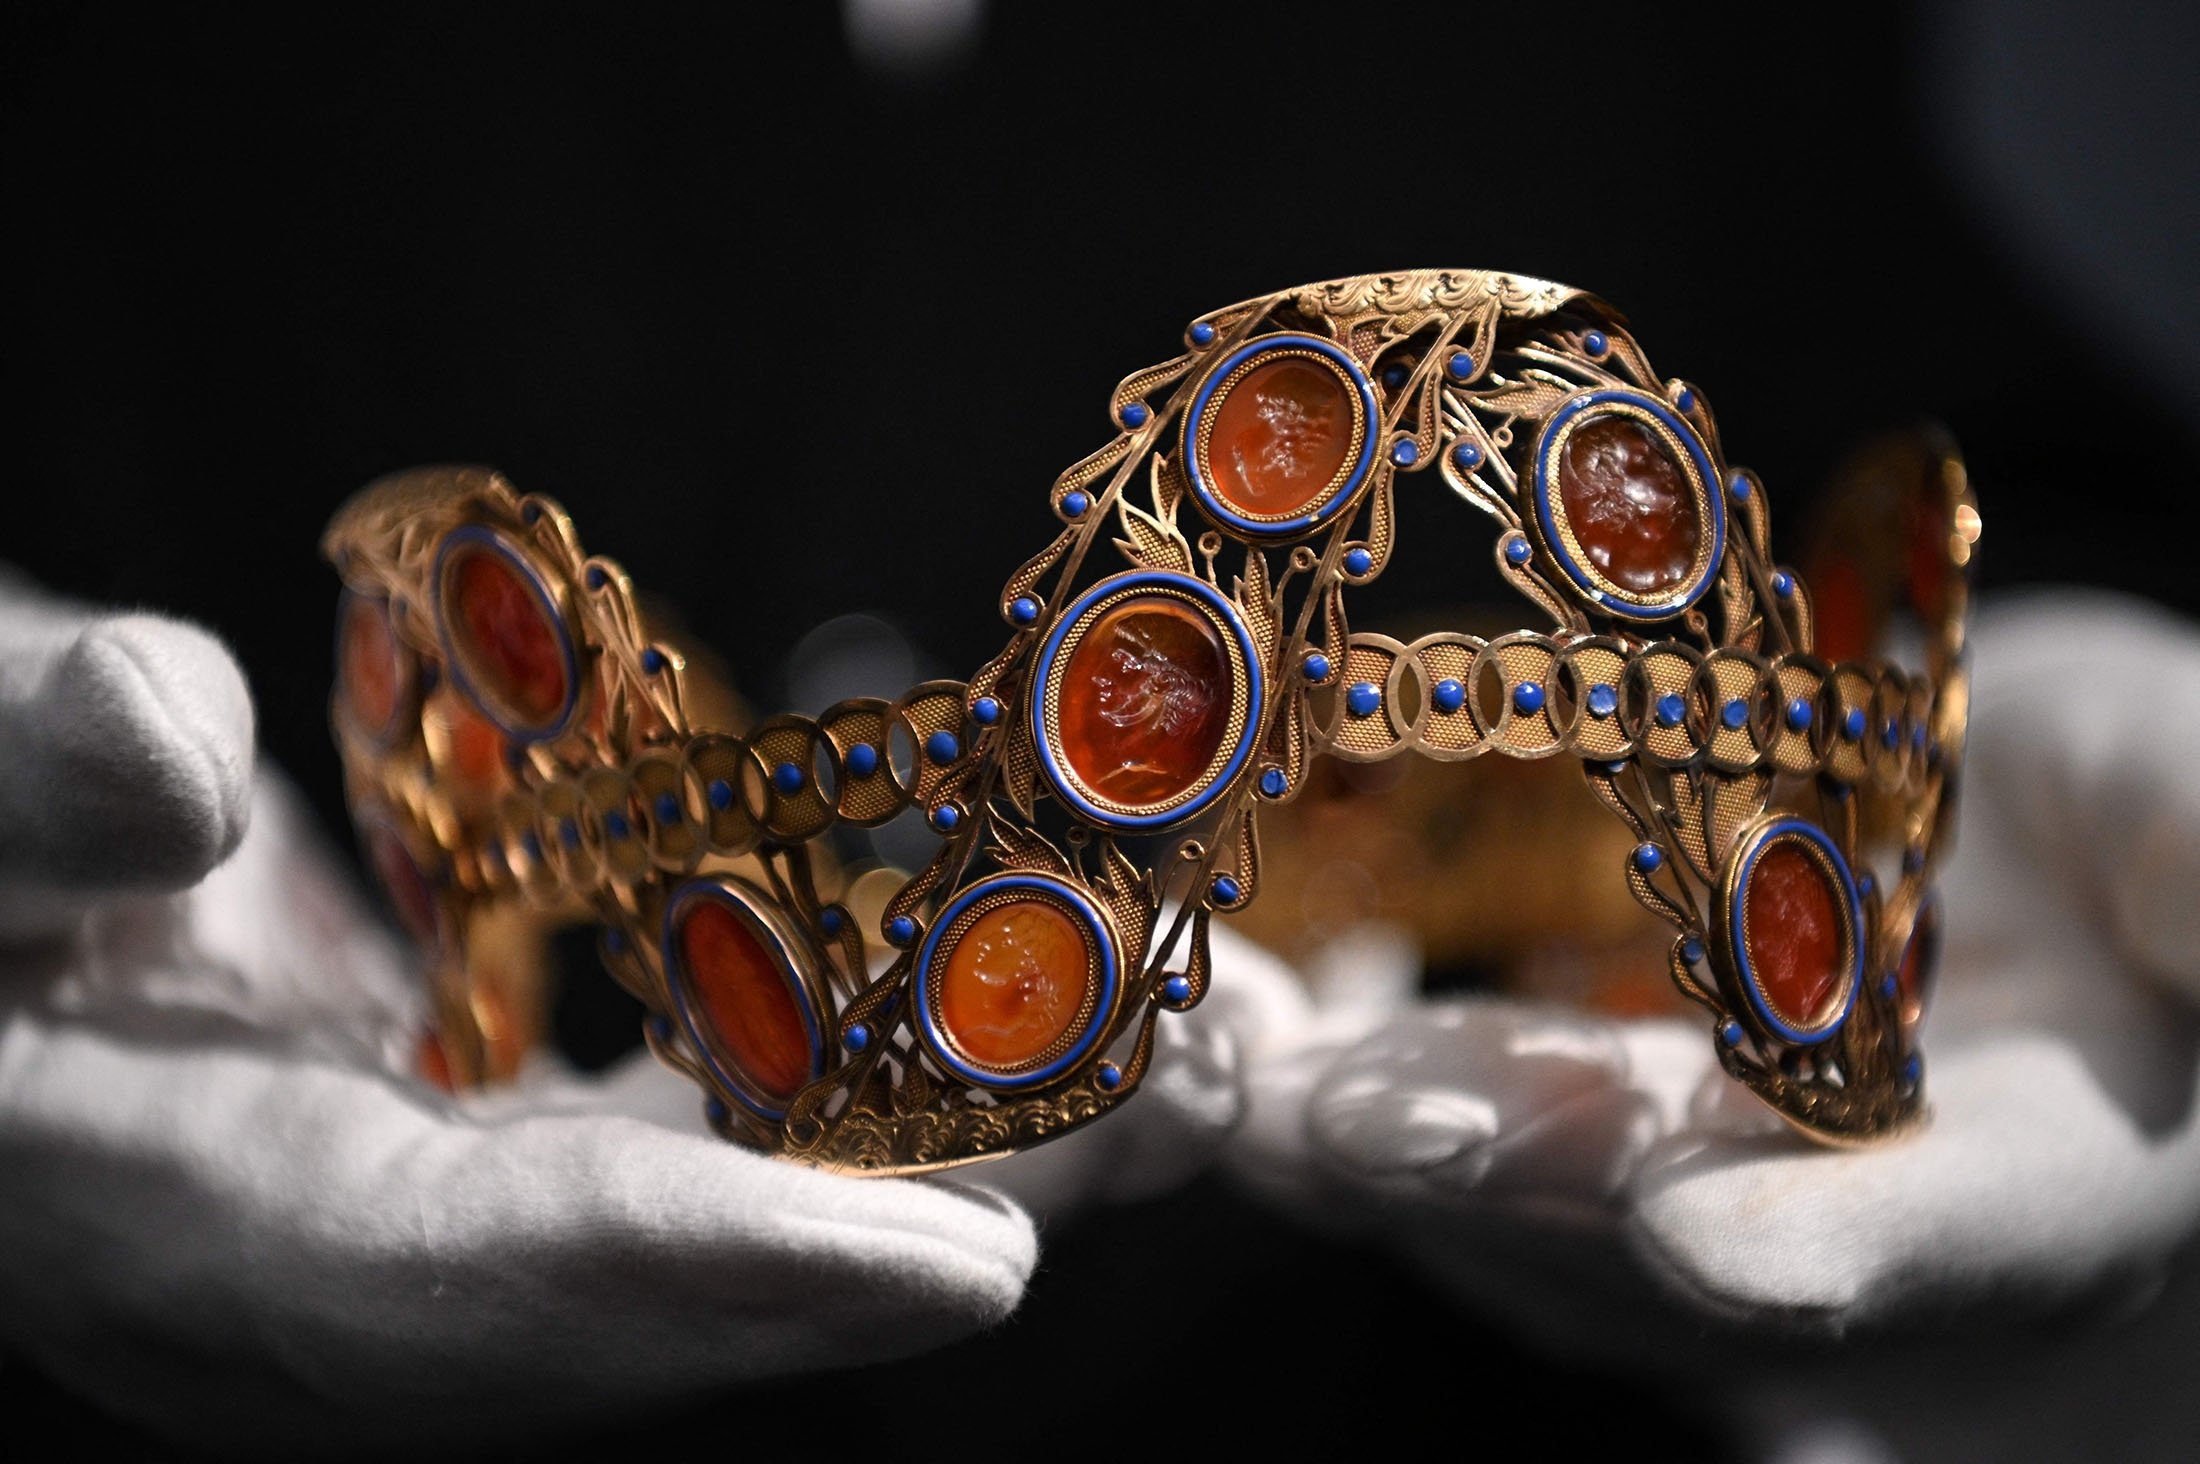 A Carnelian, enamel and gold diadem, circa 1800, believed to have belonged to Empress Josephine Bonaparte of France, is displayed during a photocall at Sotheby's Auction House in London, U.K., Dec. 3, 2021. (AFP Photo)